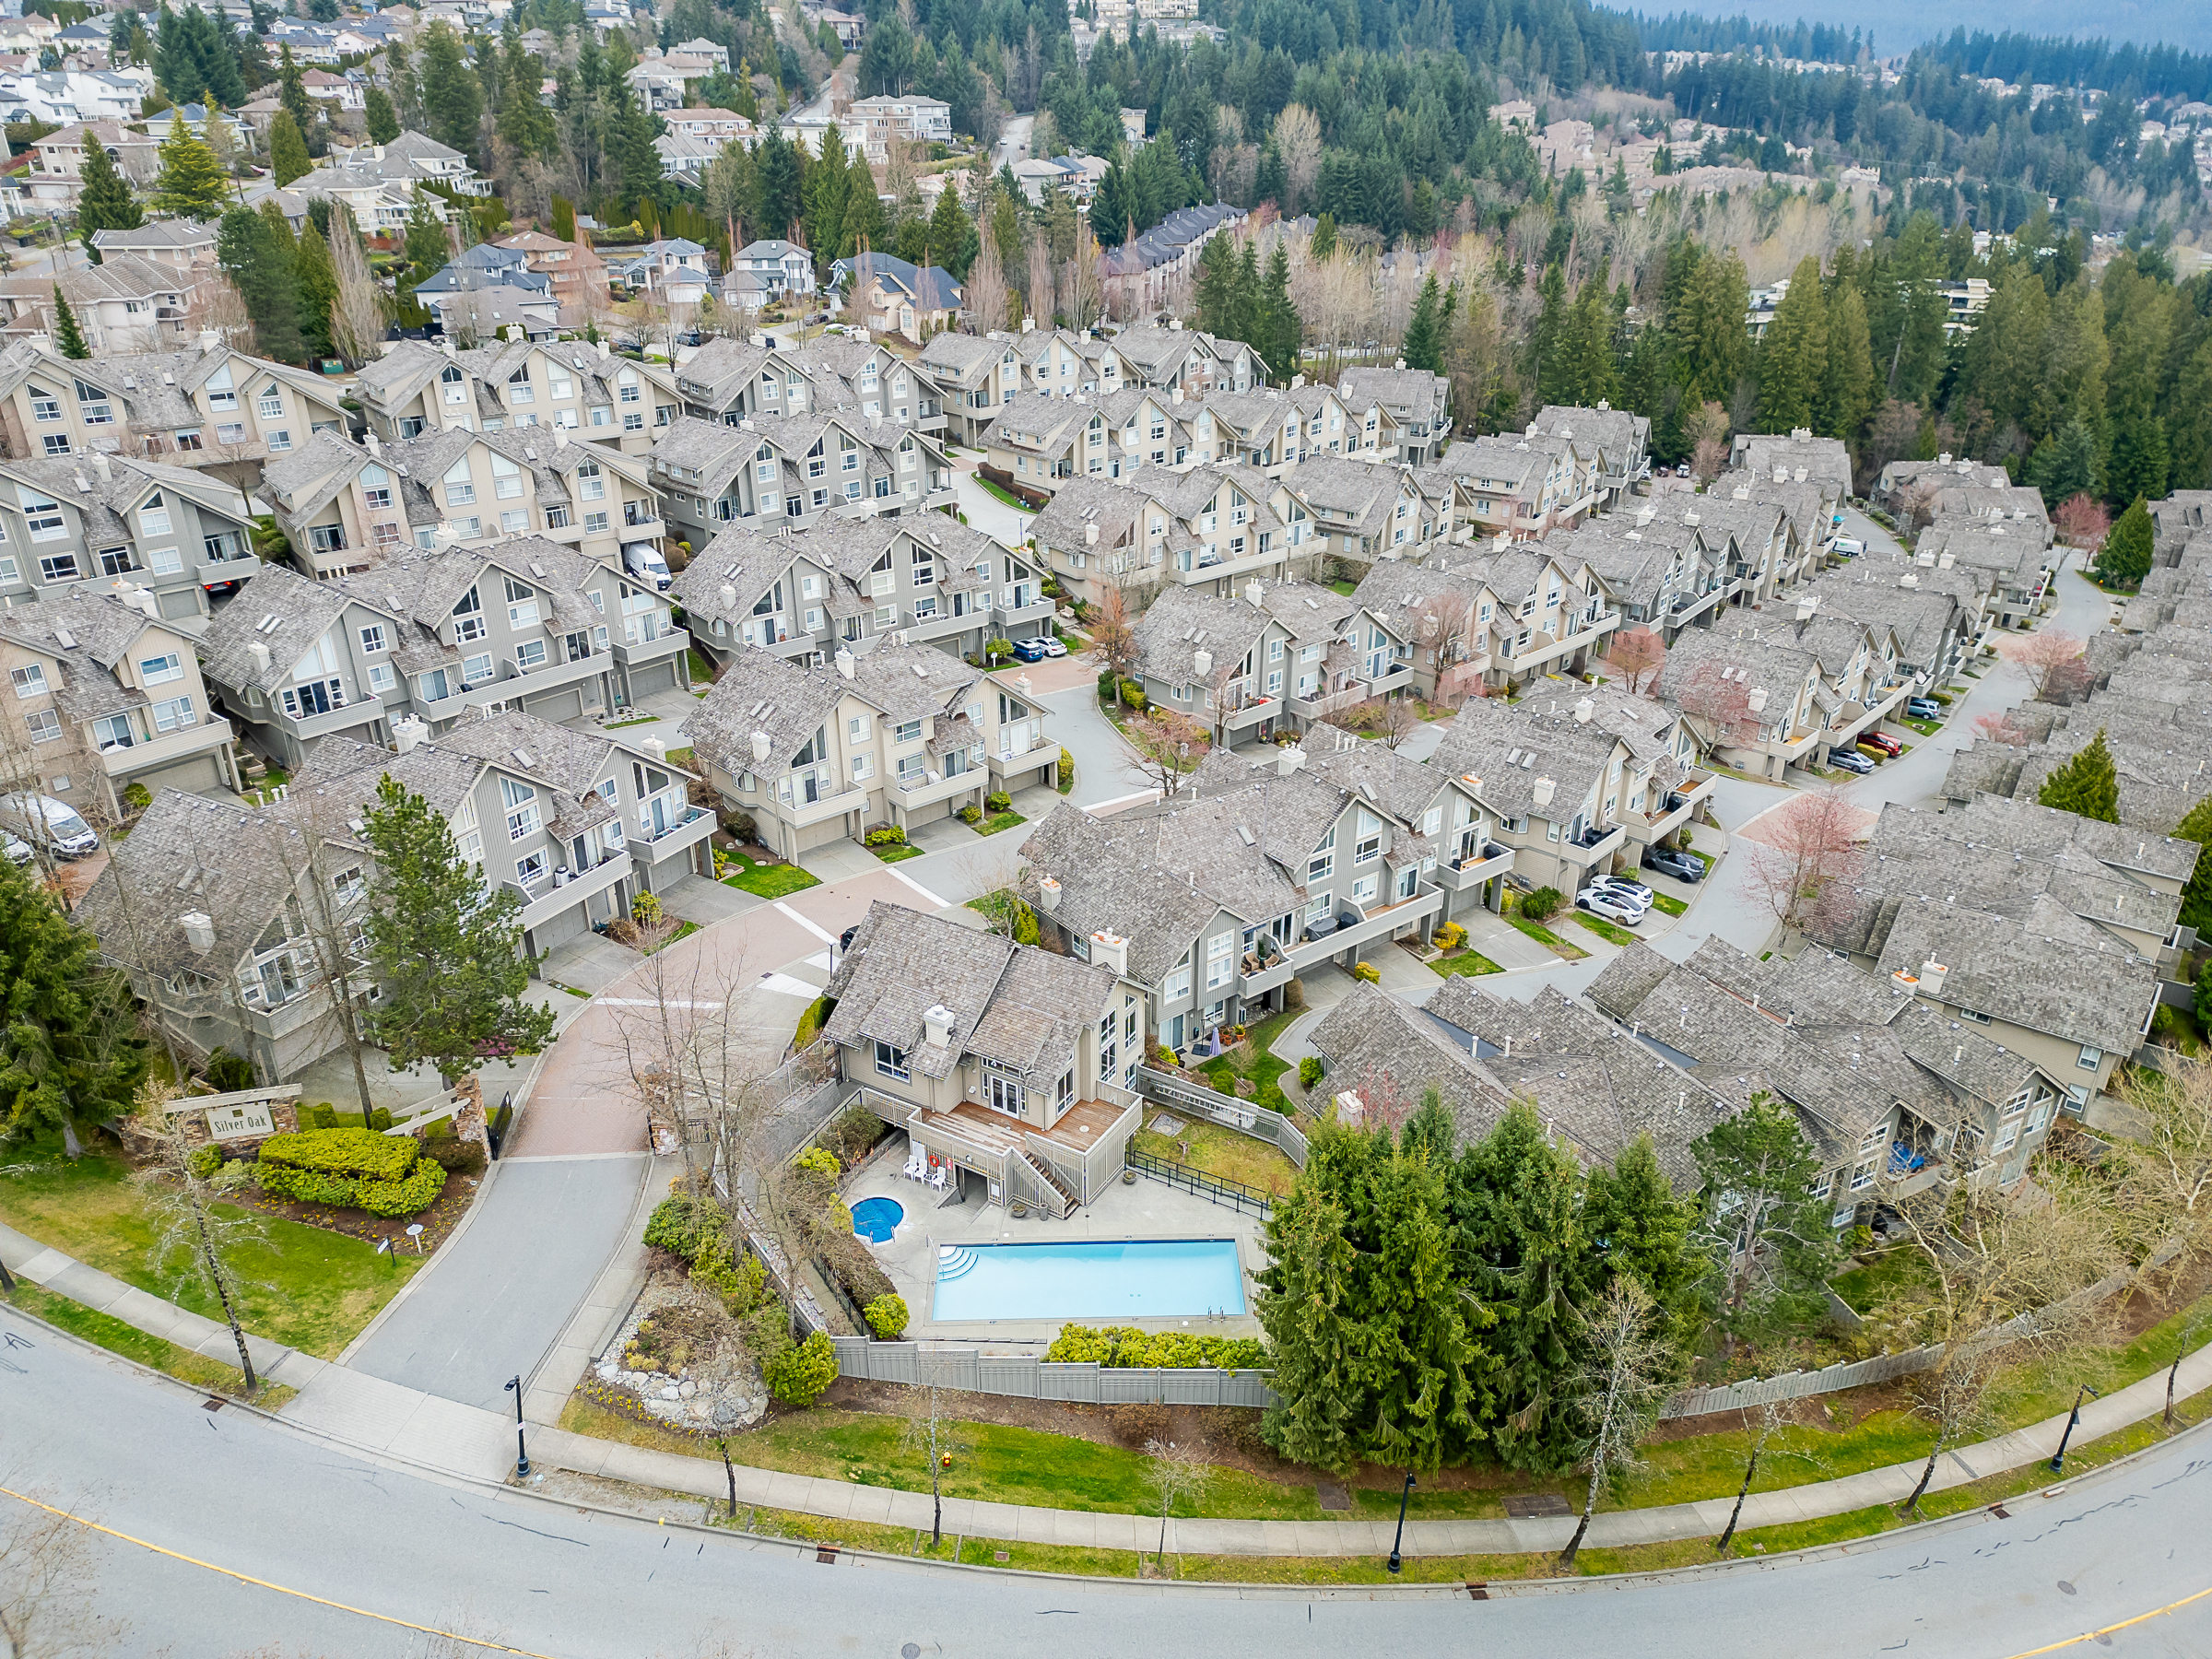 Westwood Plateau Townhome for Sale 1465 Parkway Blvd Coquitlam Top Realtor Krista Lapp